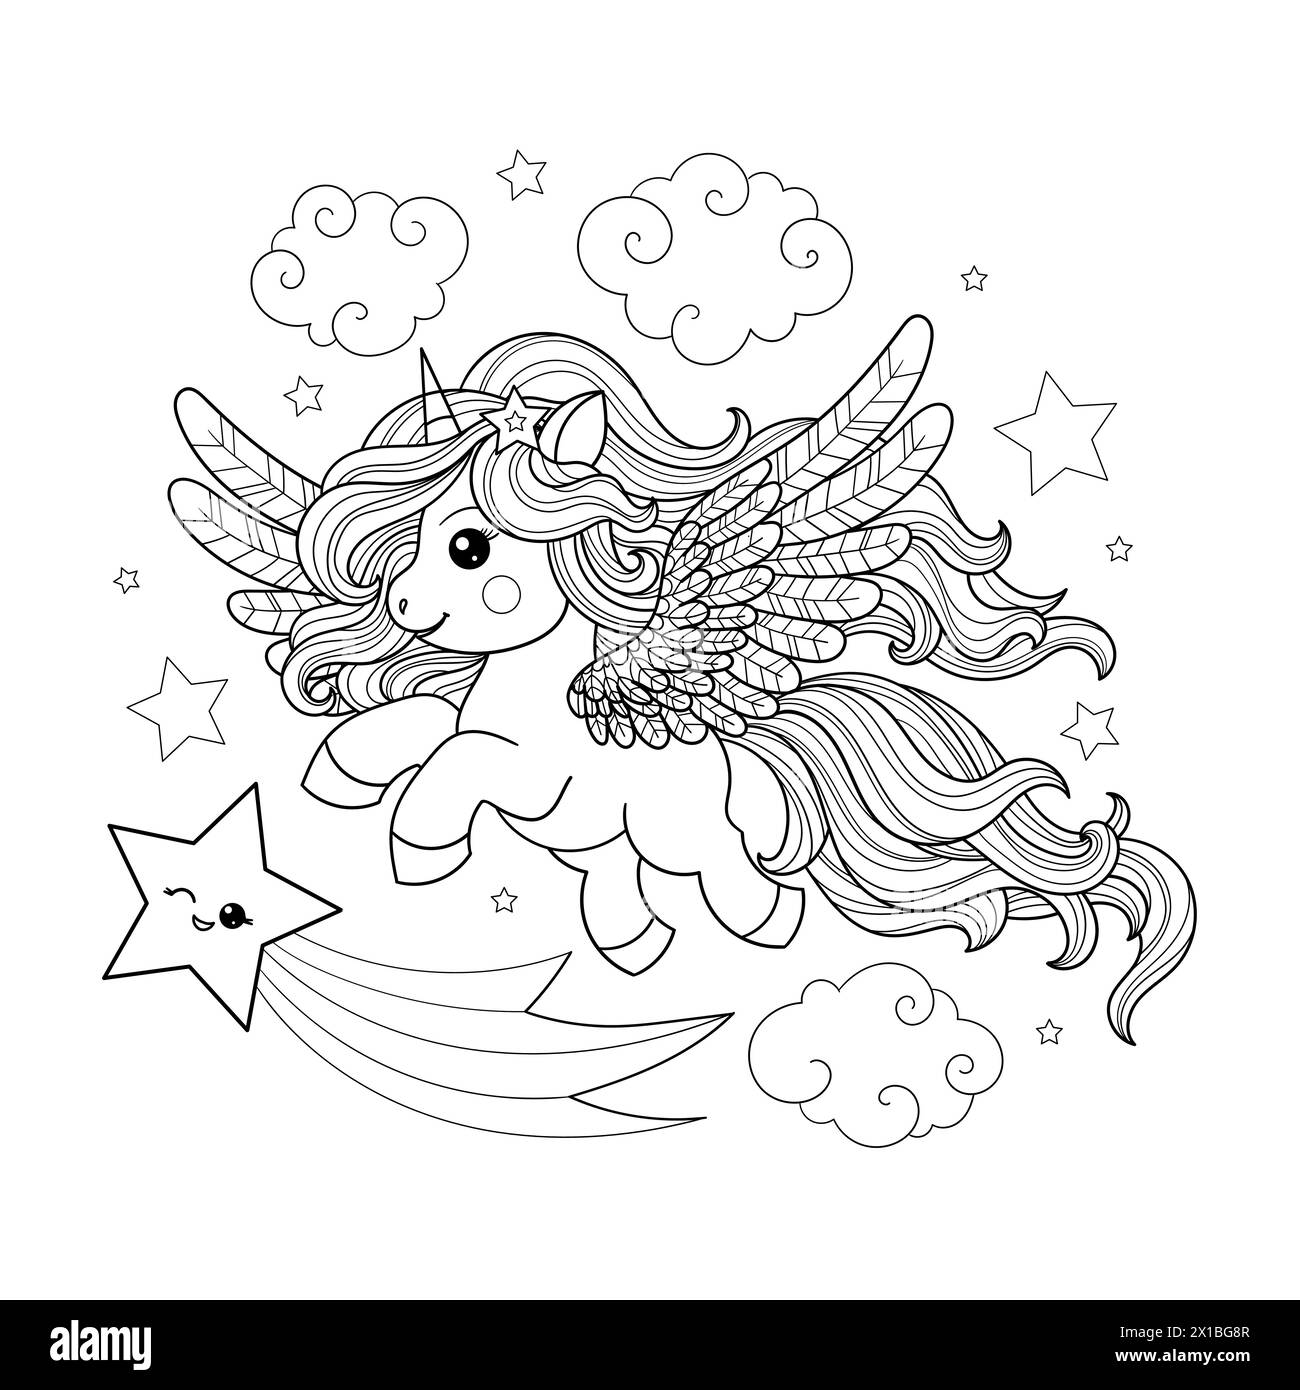 A cute, little cartoon unicorn with a long mane flies in the sky with a star. Black and white linear drawing. For children's design of coloring books, Stock Vector